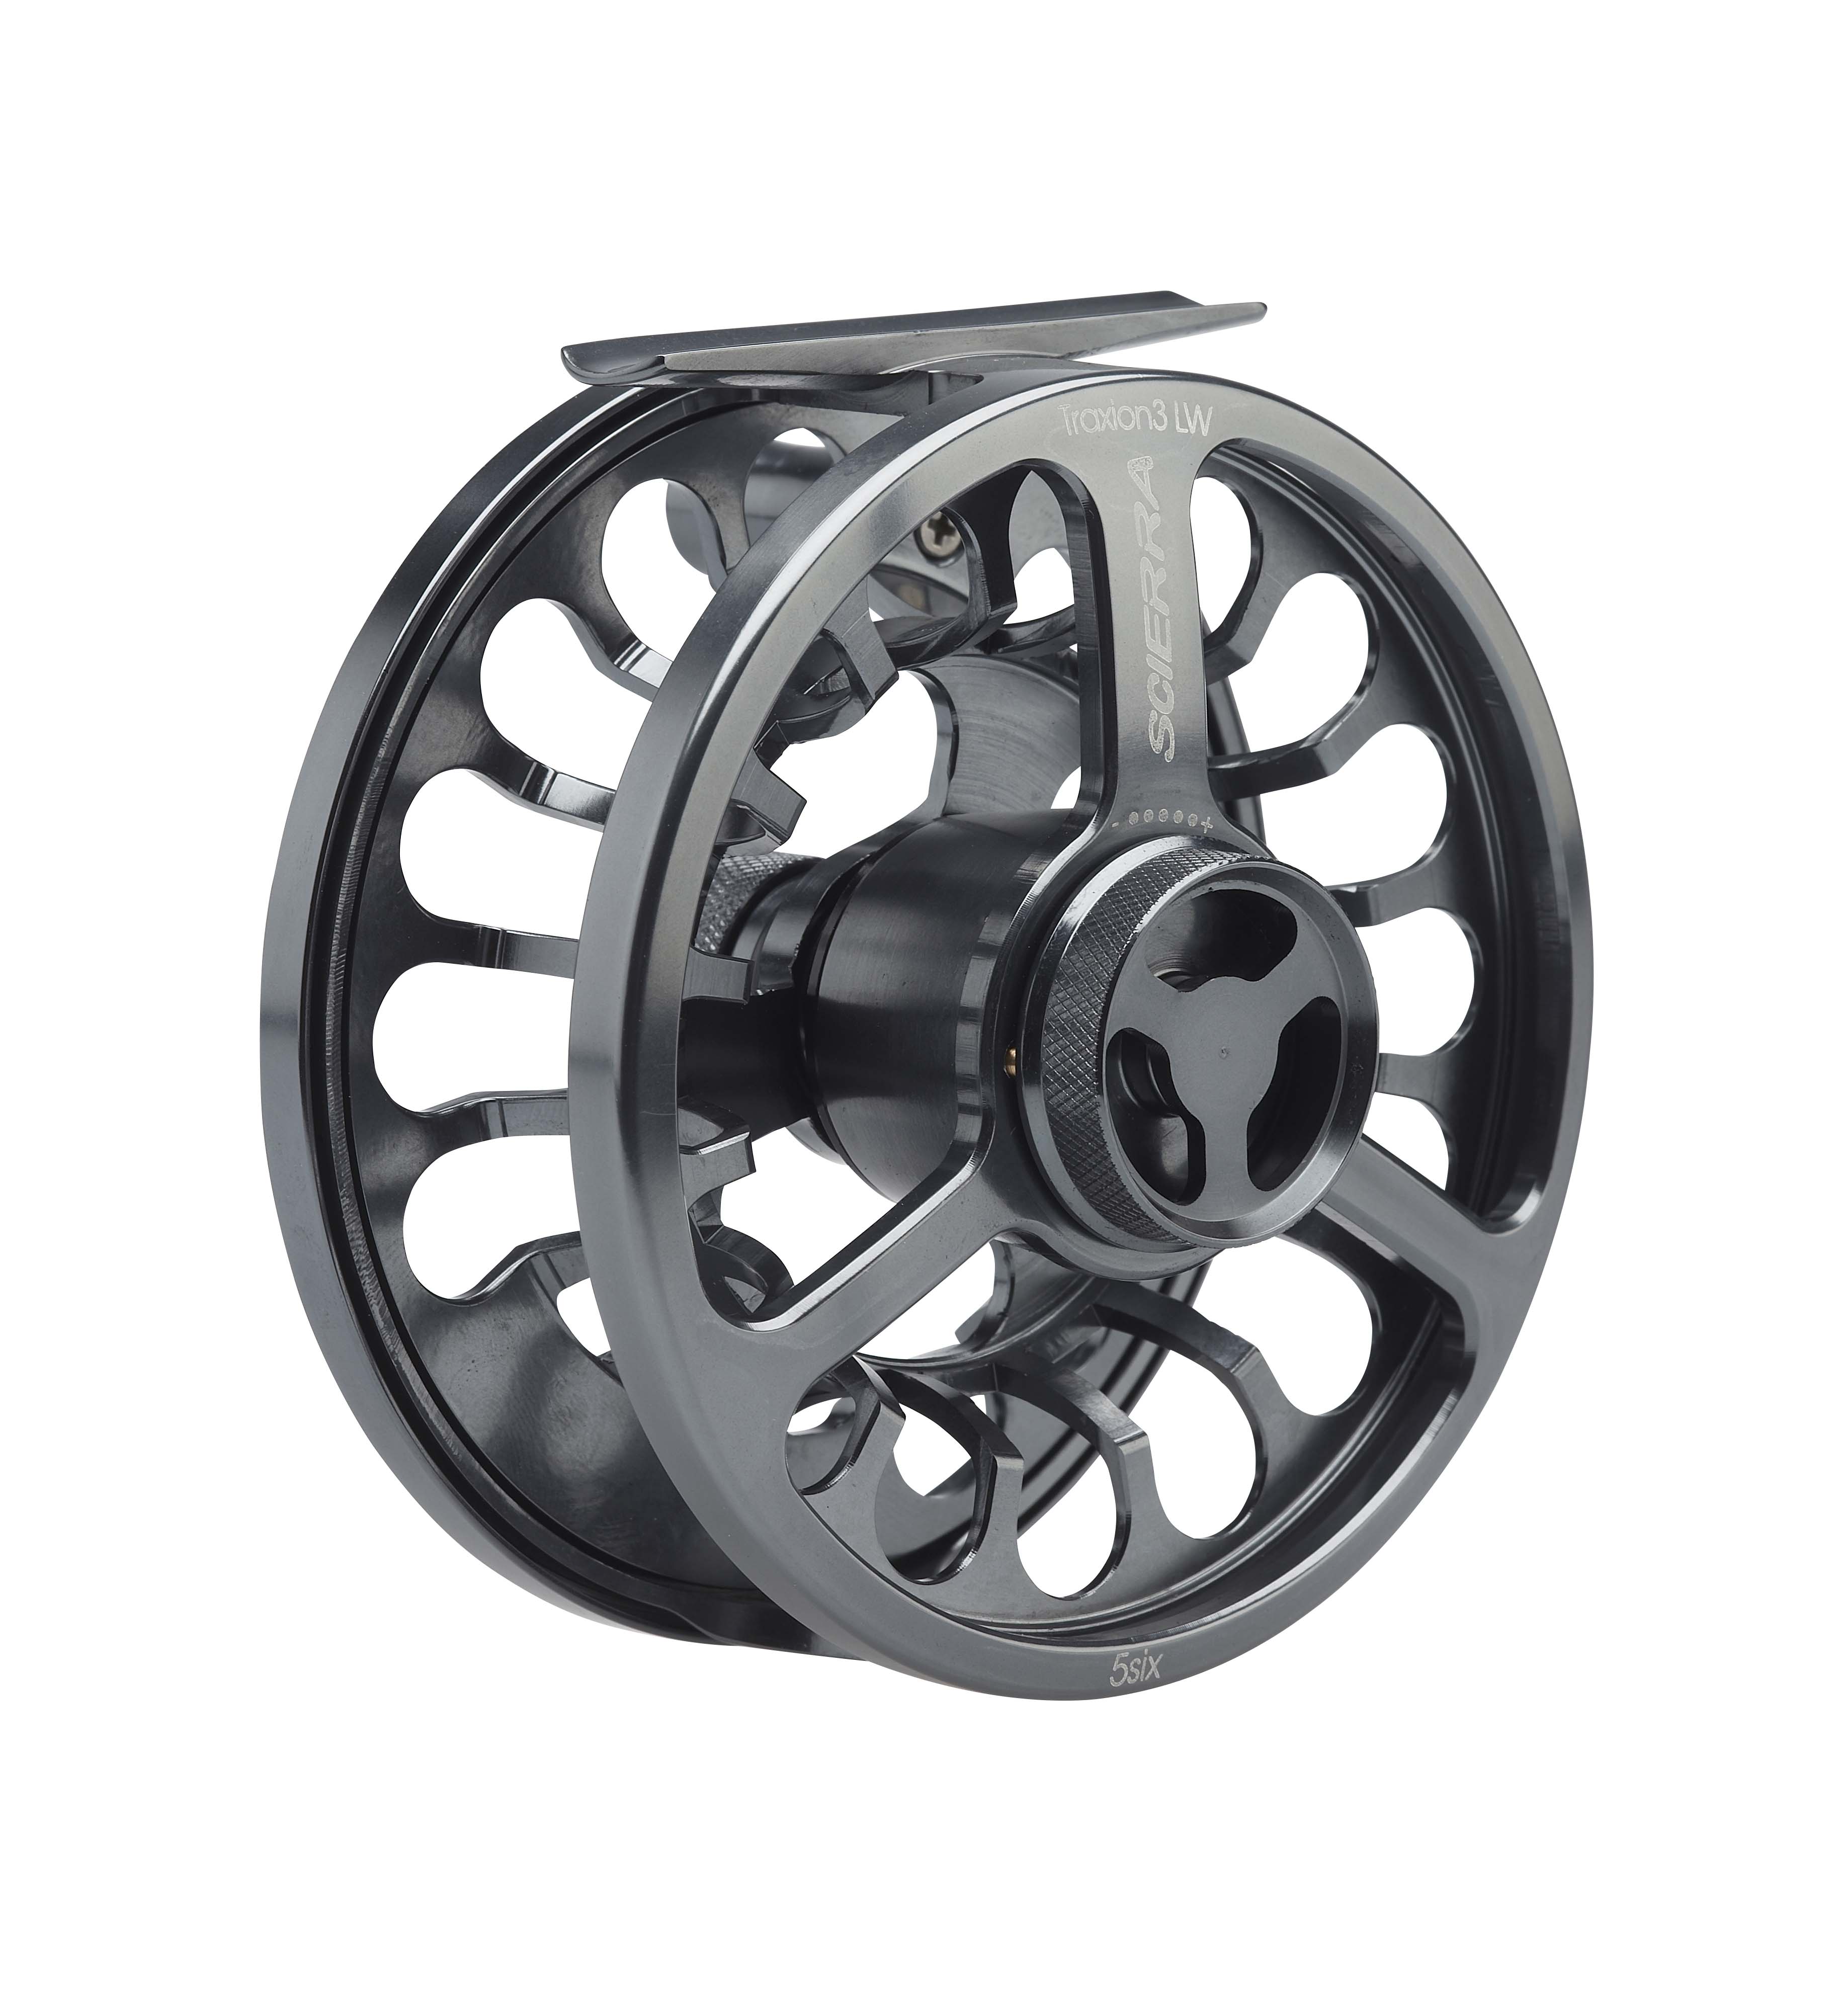 Scierra Traxion 2 Water tight drag Fly reel  Spare spool also available